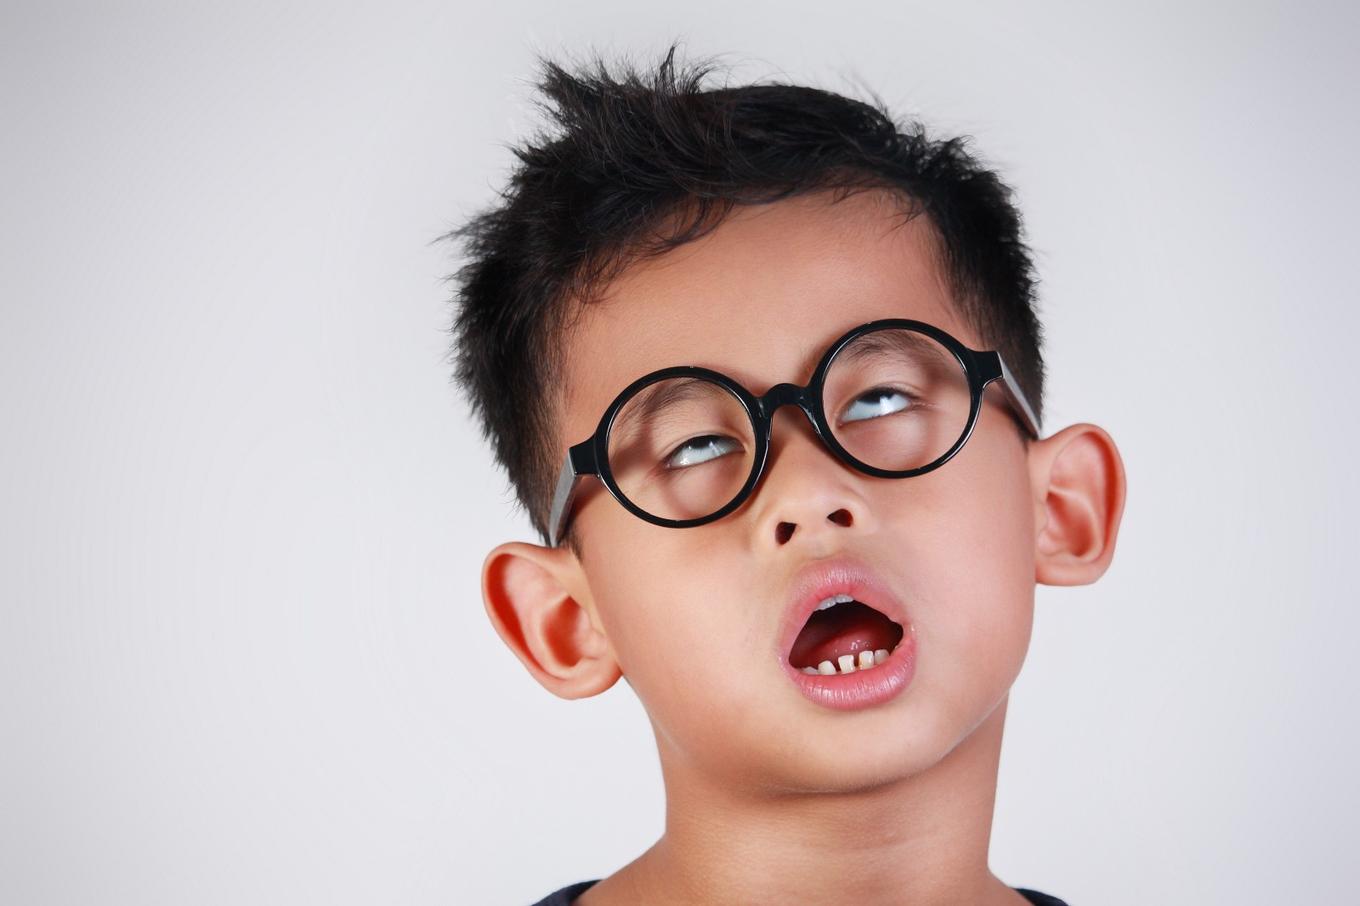 Little kid with round glasses looking very bored.